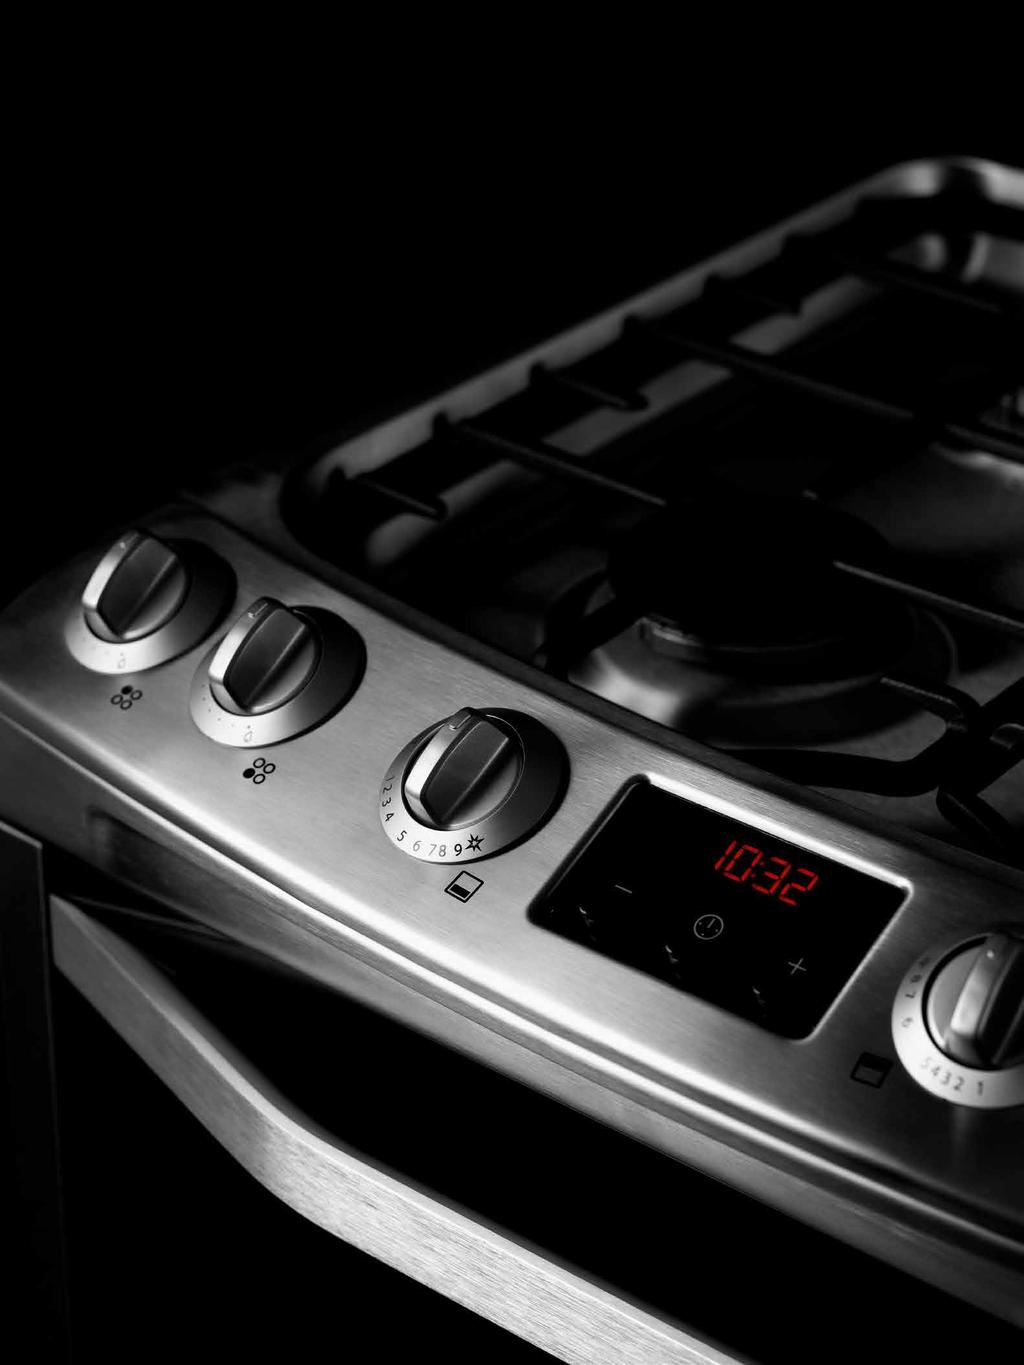 60cm dual-fuel double-oven cooker JLFSMC613 Stock number 866 00206 749 If you prefer a gas hob but like to vary your oven functions, this multi-fuel cooker offers the best of both worlds.